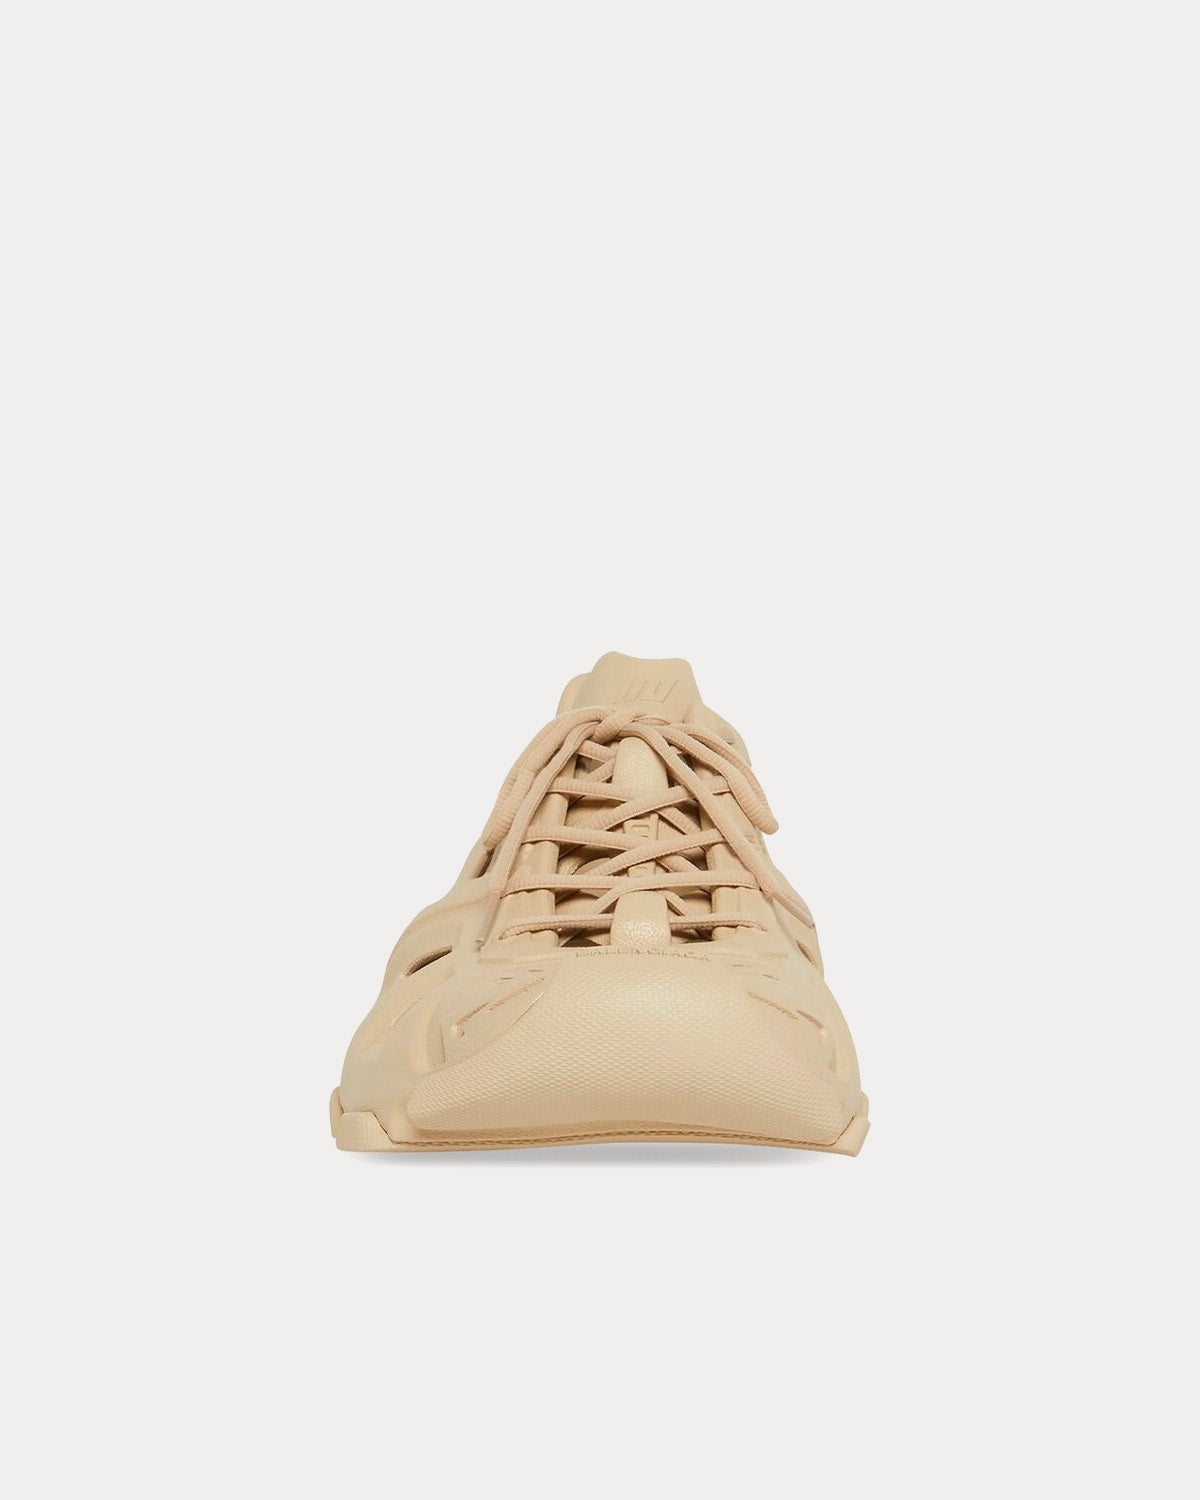 Balenciaga - HD Lace-Up Rubber Nude Low Top Sneakers